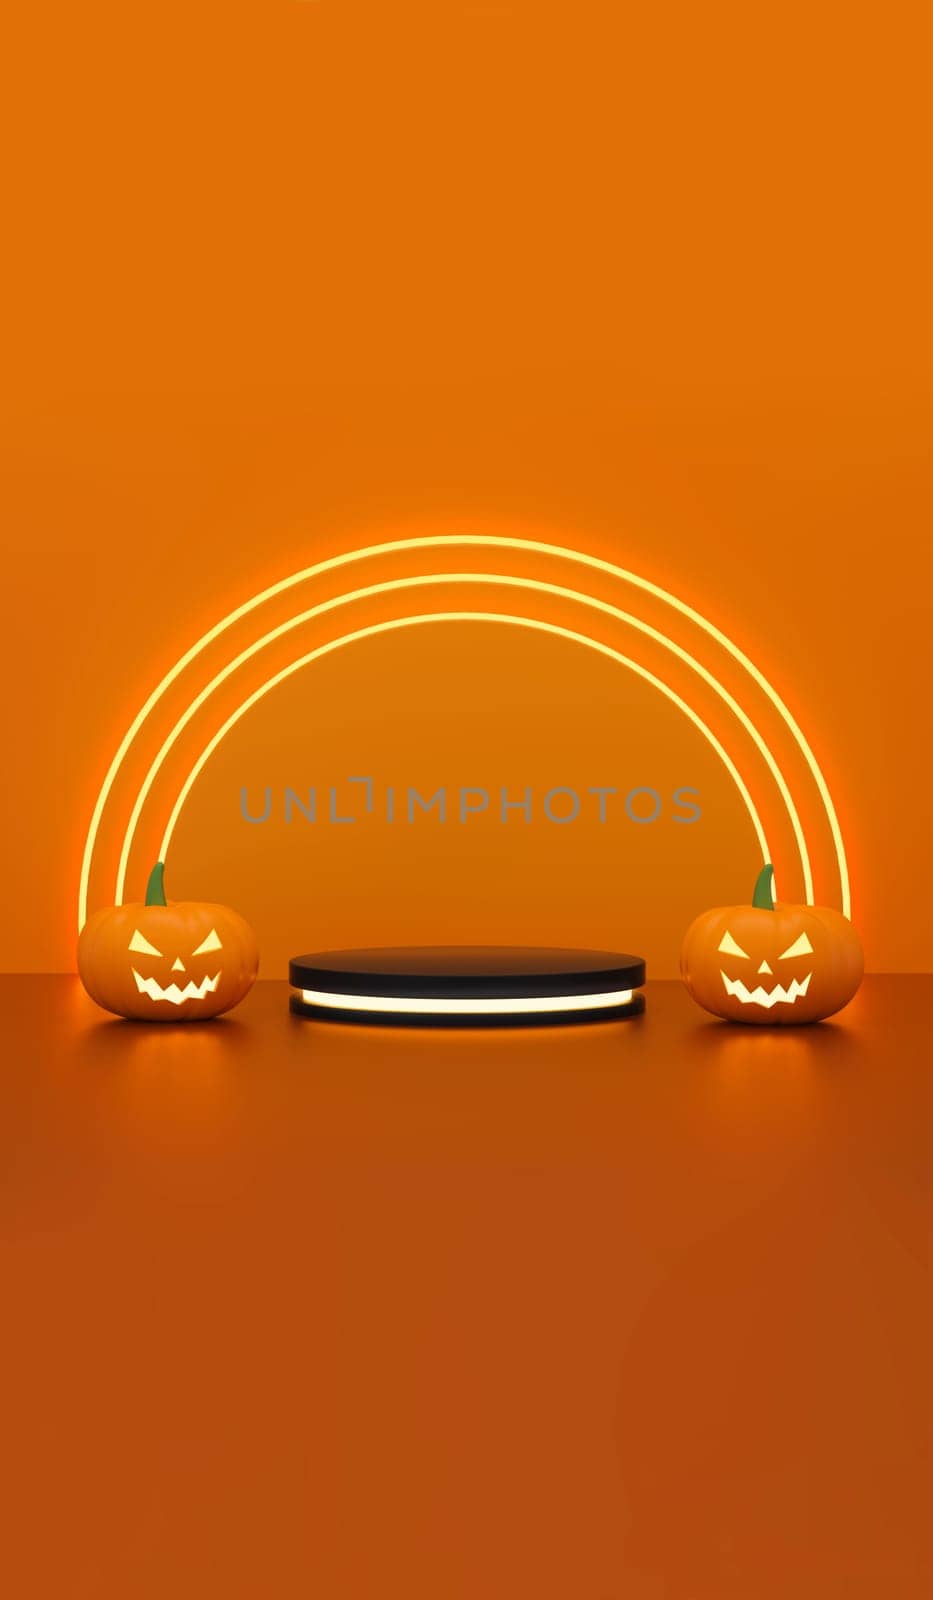 Empty halloween with podium platform cylinders with light neon and pumpkins halloween for product display in orange background. by ImagesRouges